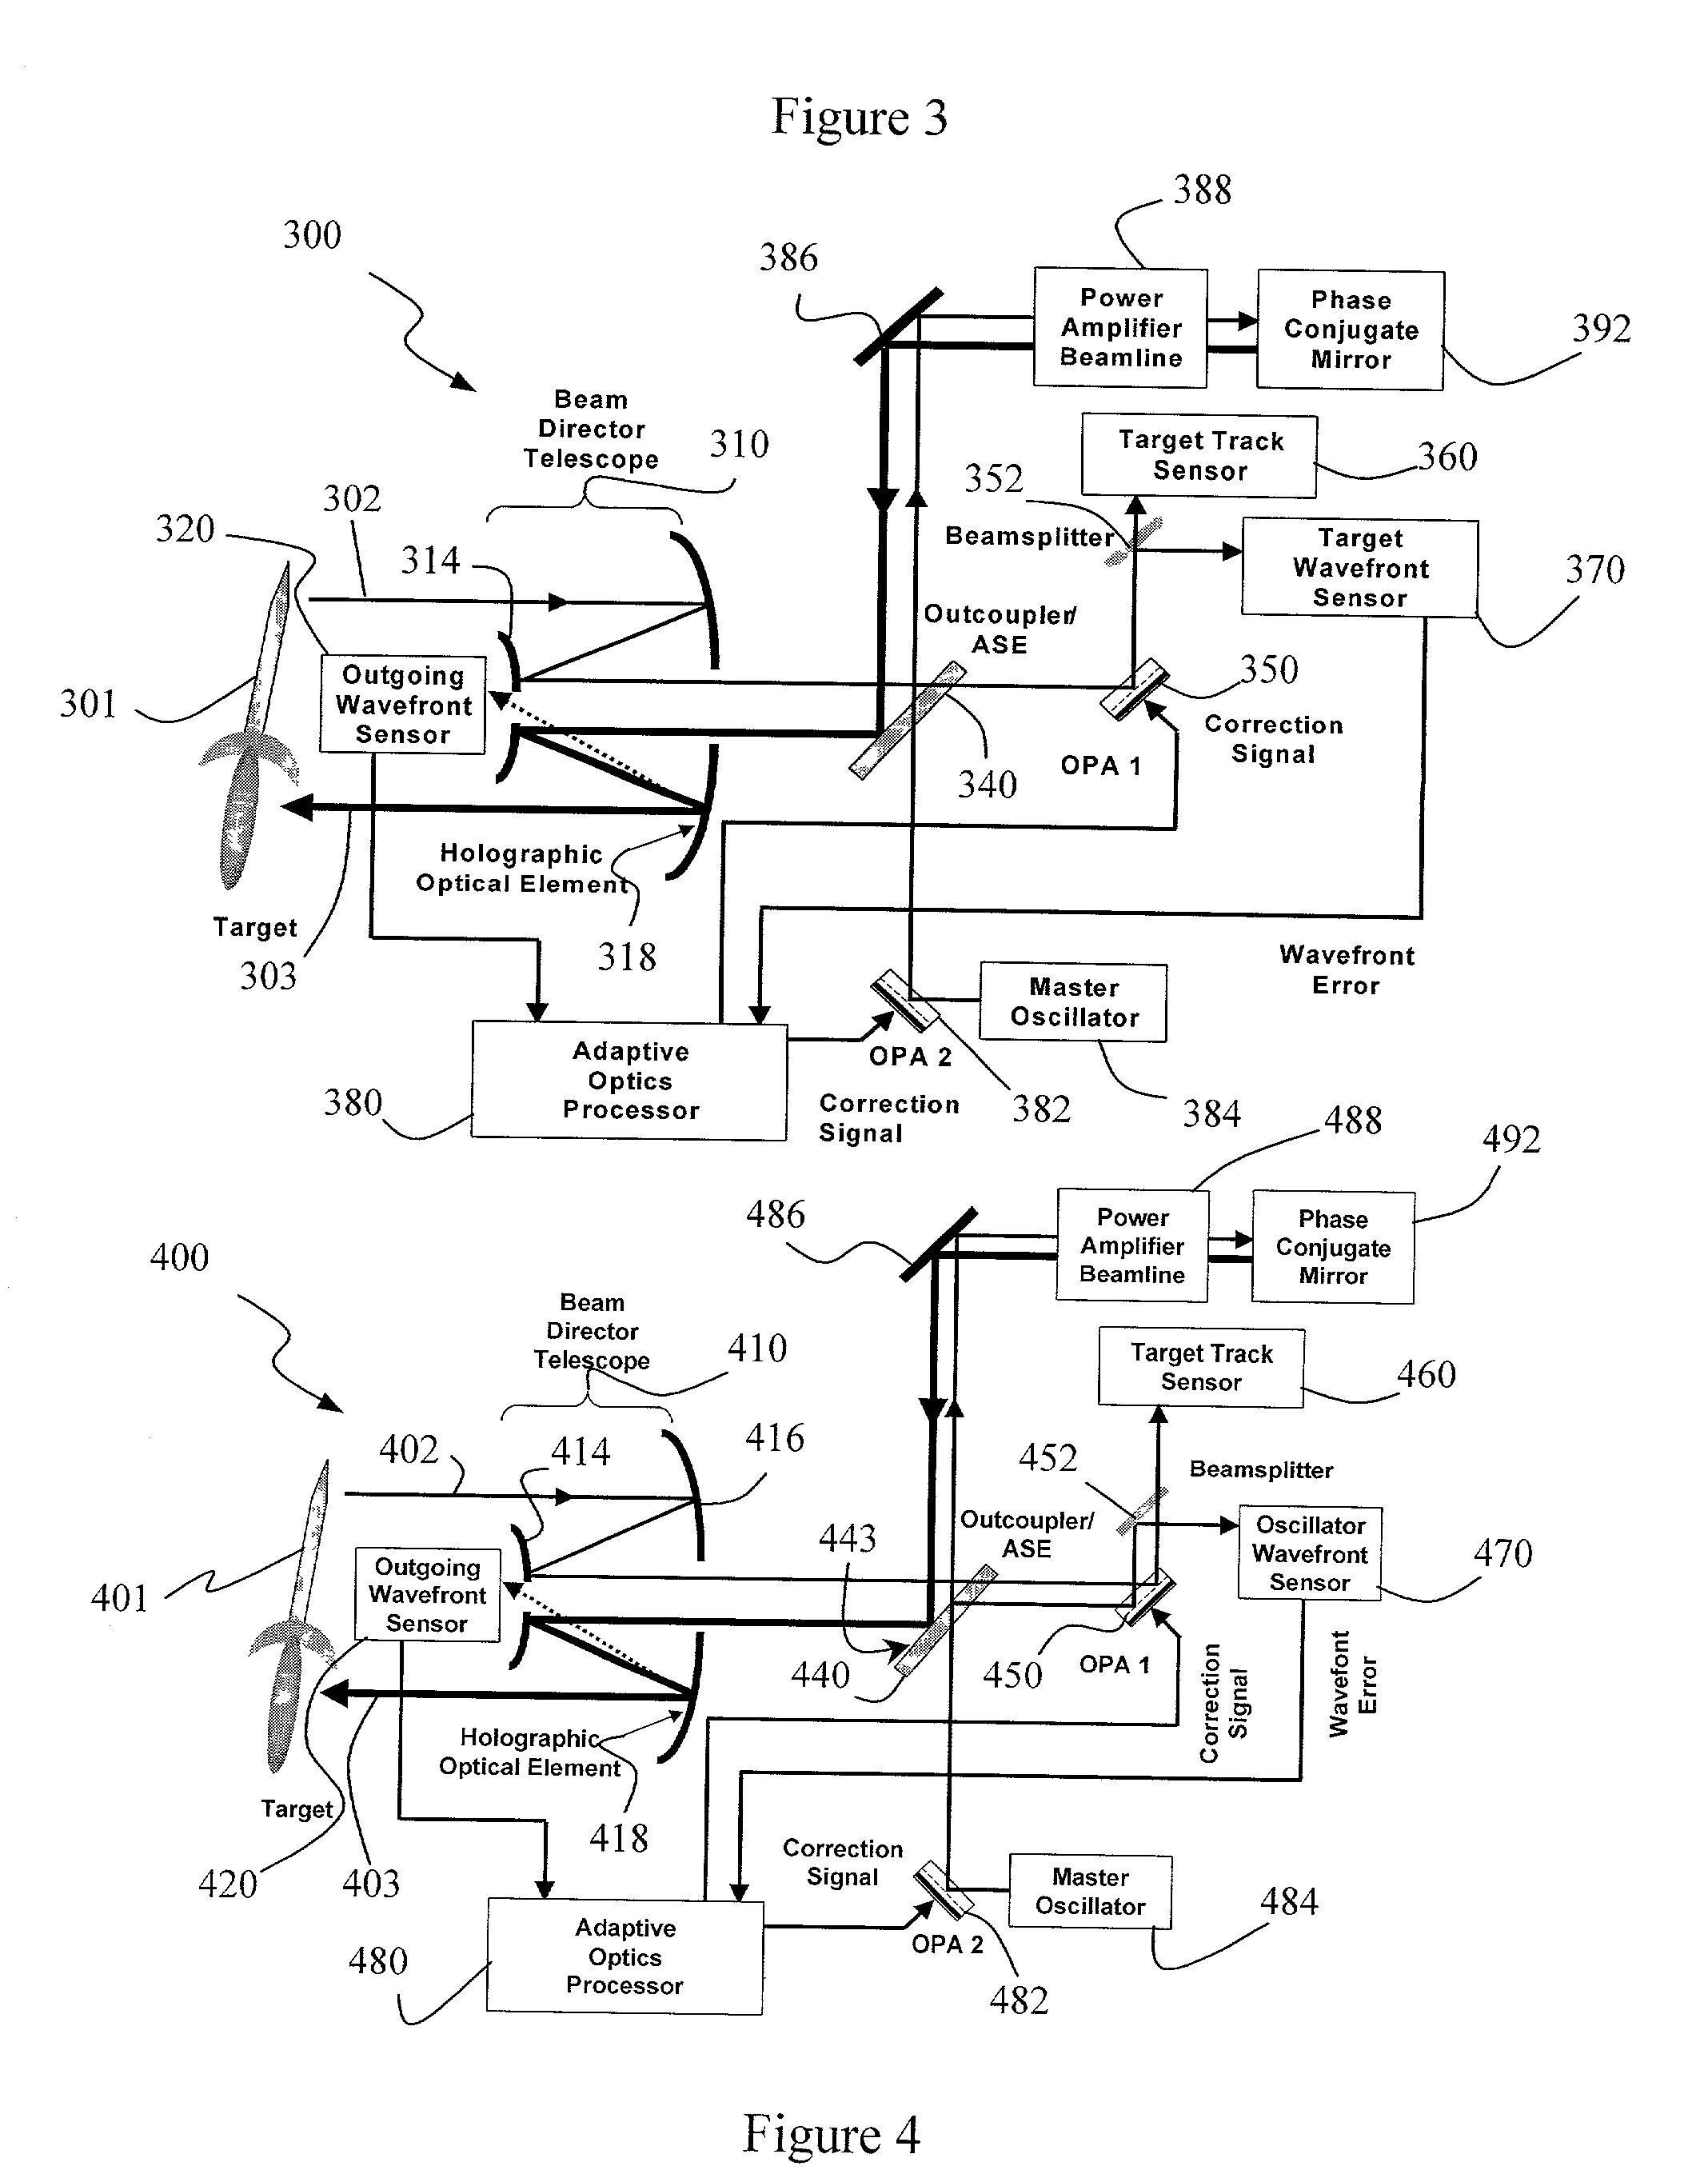 System and method for effecting high-power beam control with outgoing wavefront correction utilizing holographic sampling at primary mirror, phase conjugation, and adaptive optics in low power beam path